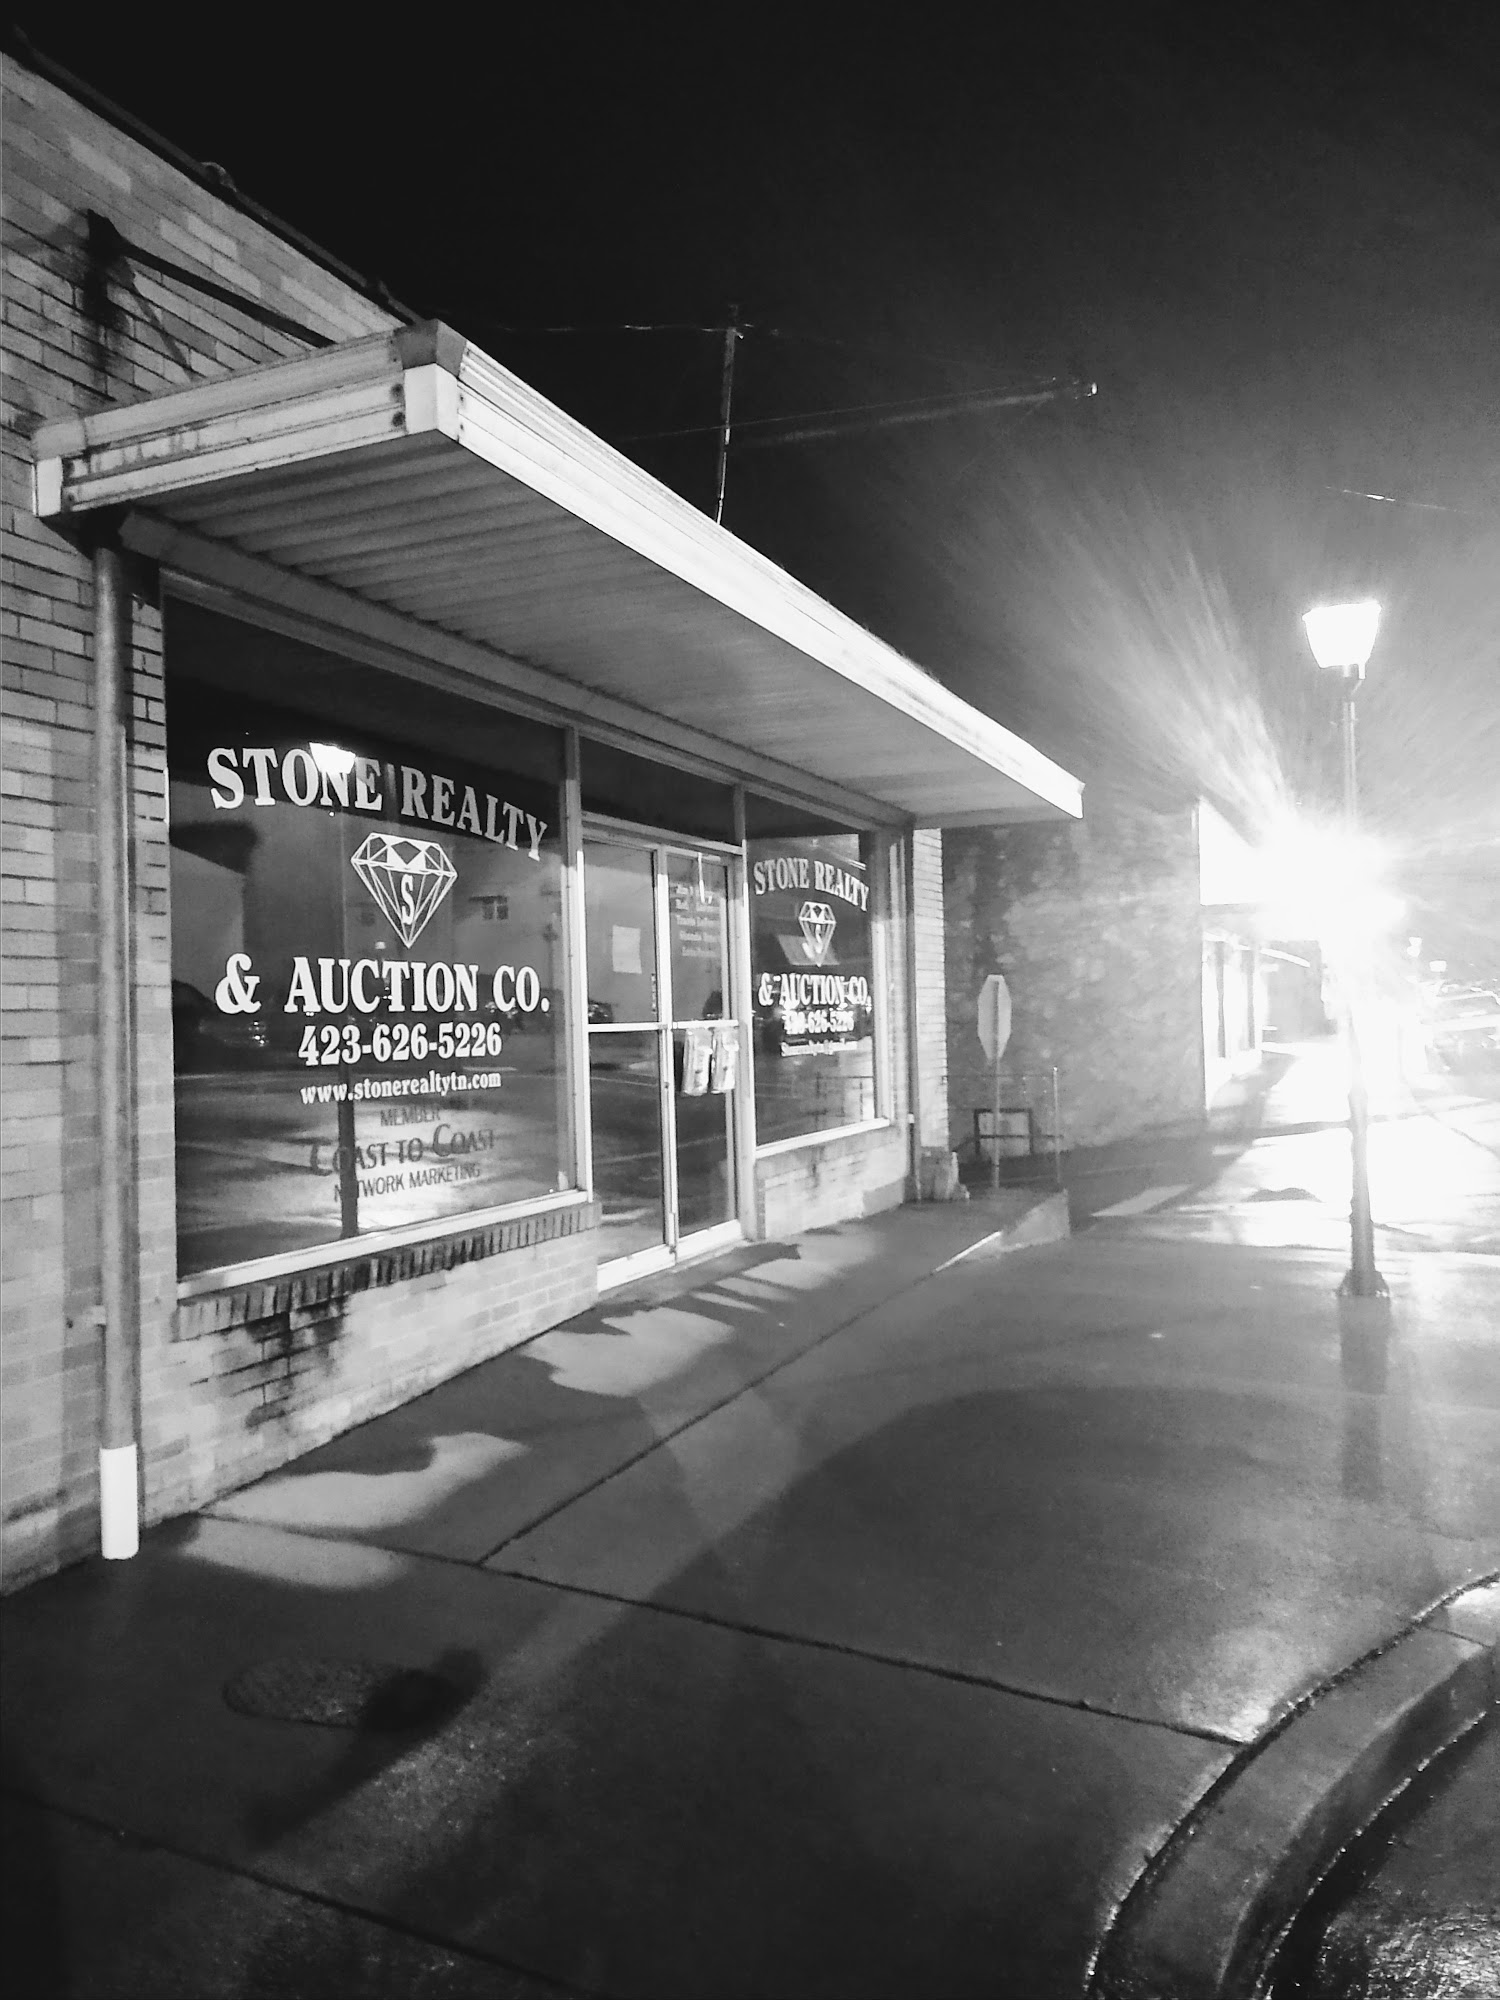 Stone Realty & Auction CO. 1725 Main St, Tazewell Tennessee 37879